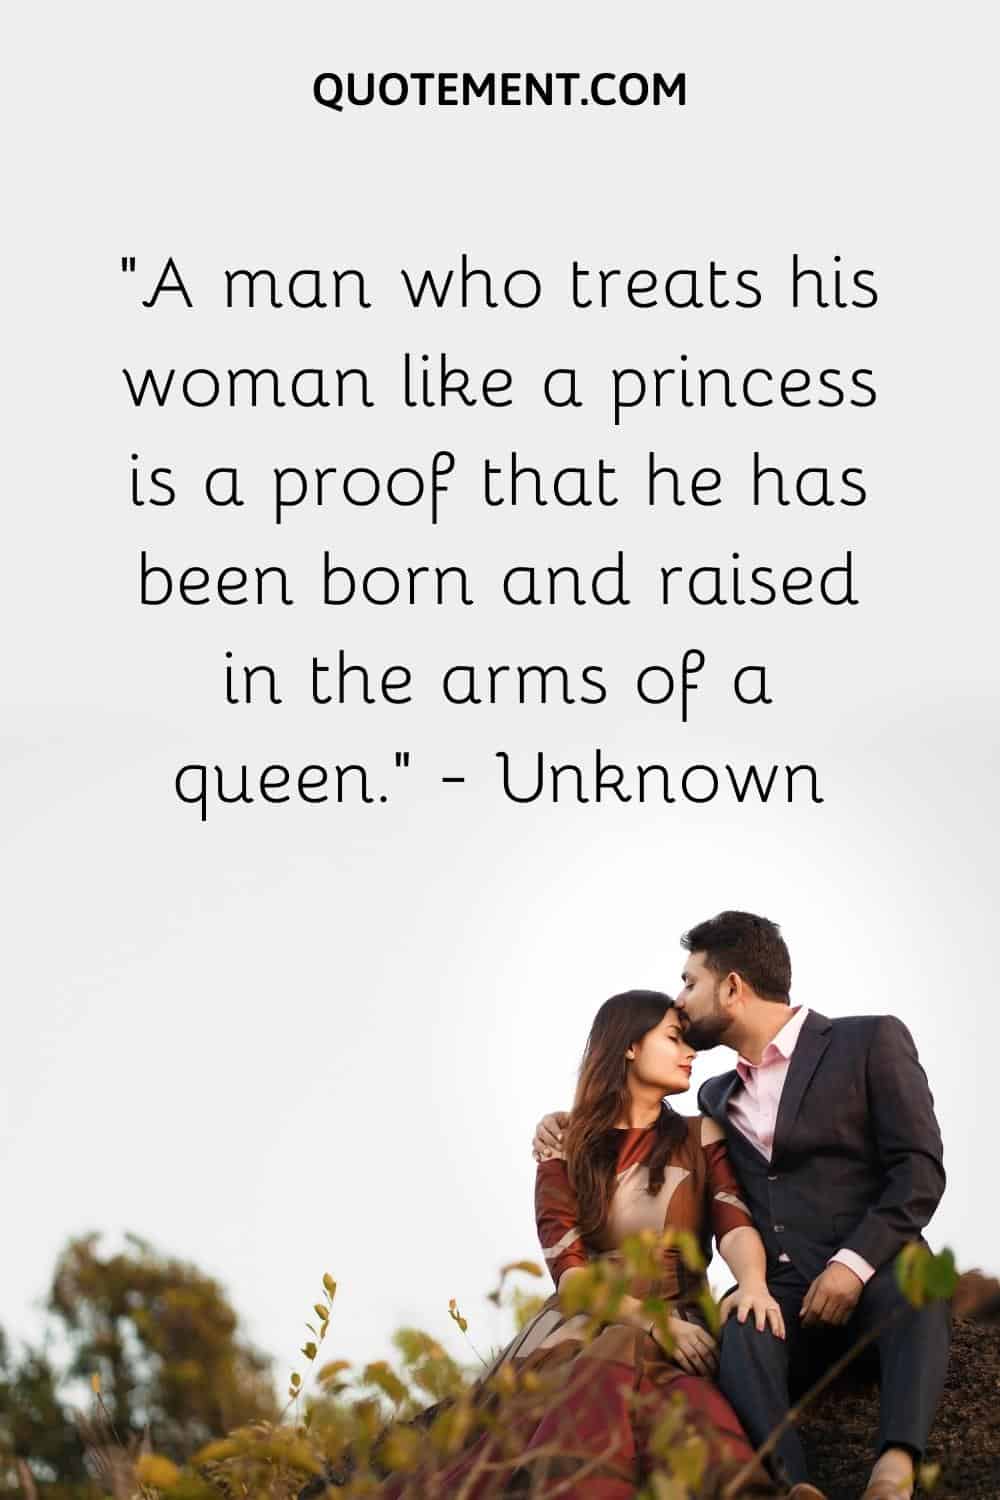 A man who treats his woman like a princess is a proof that he has been born and raised in the arms of a queen